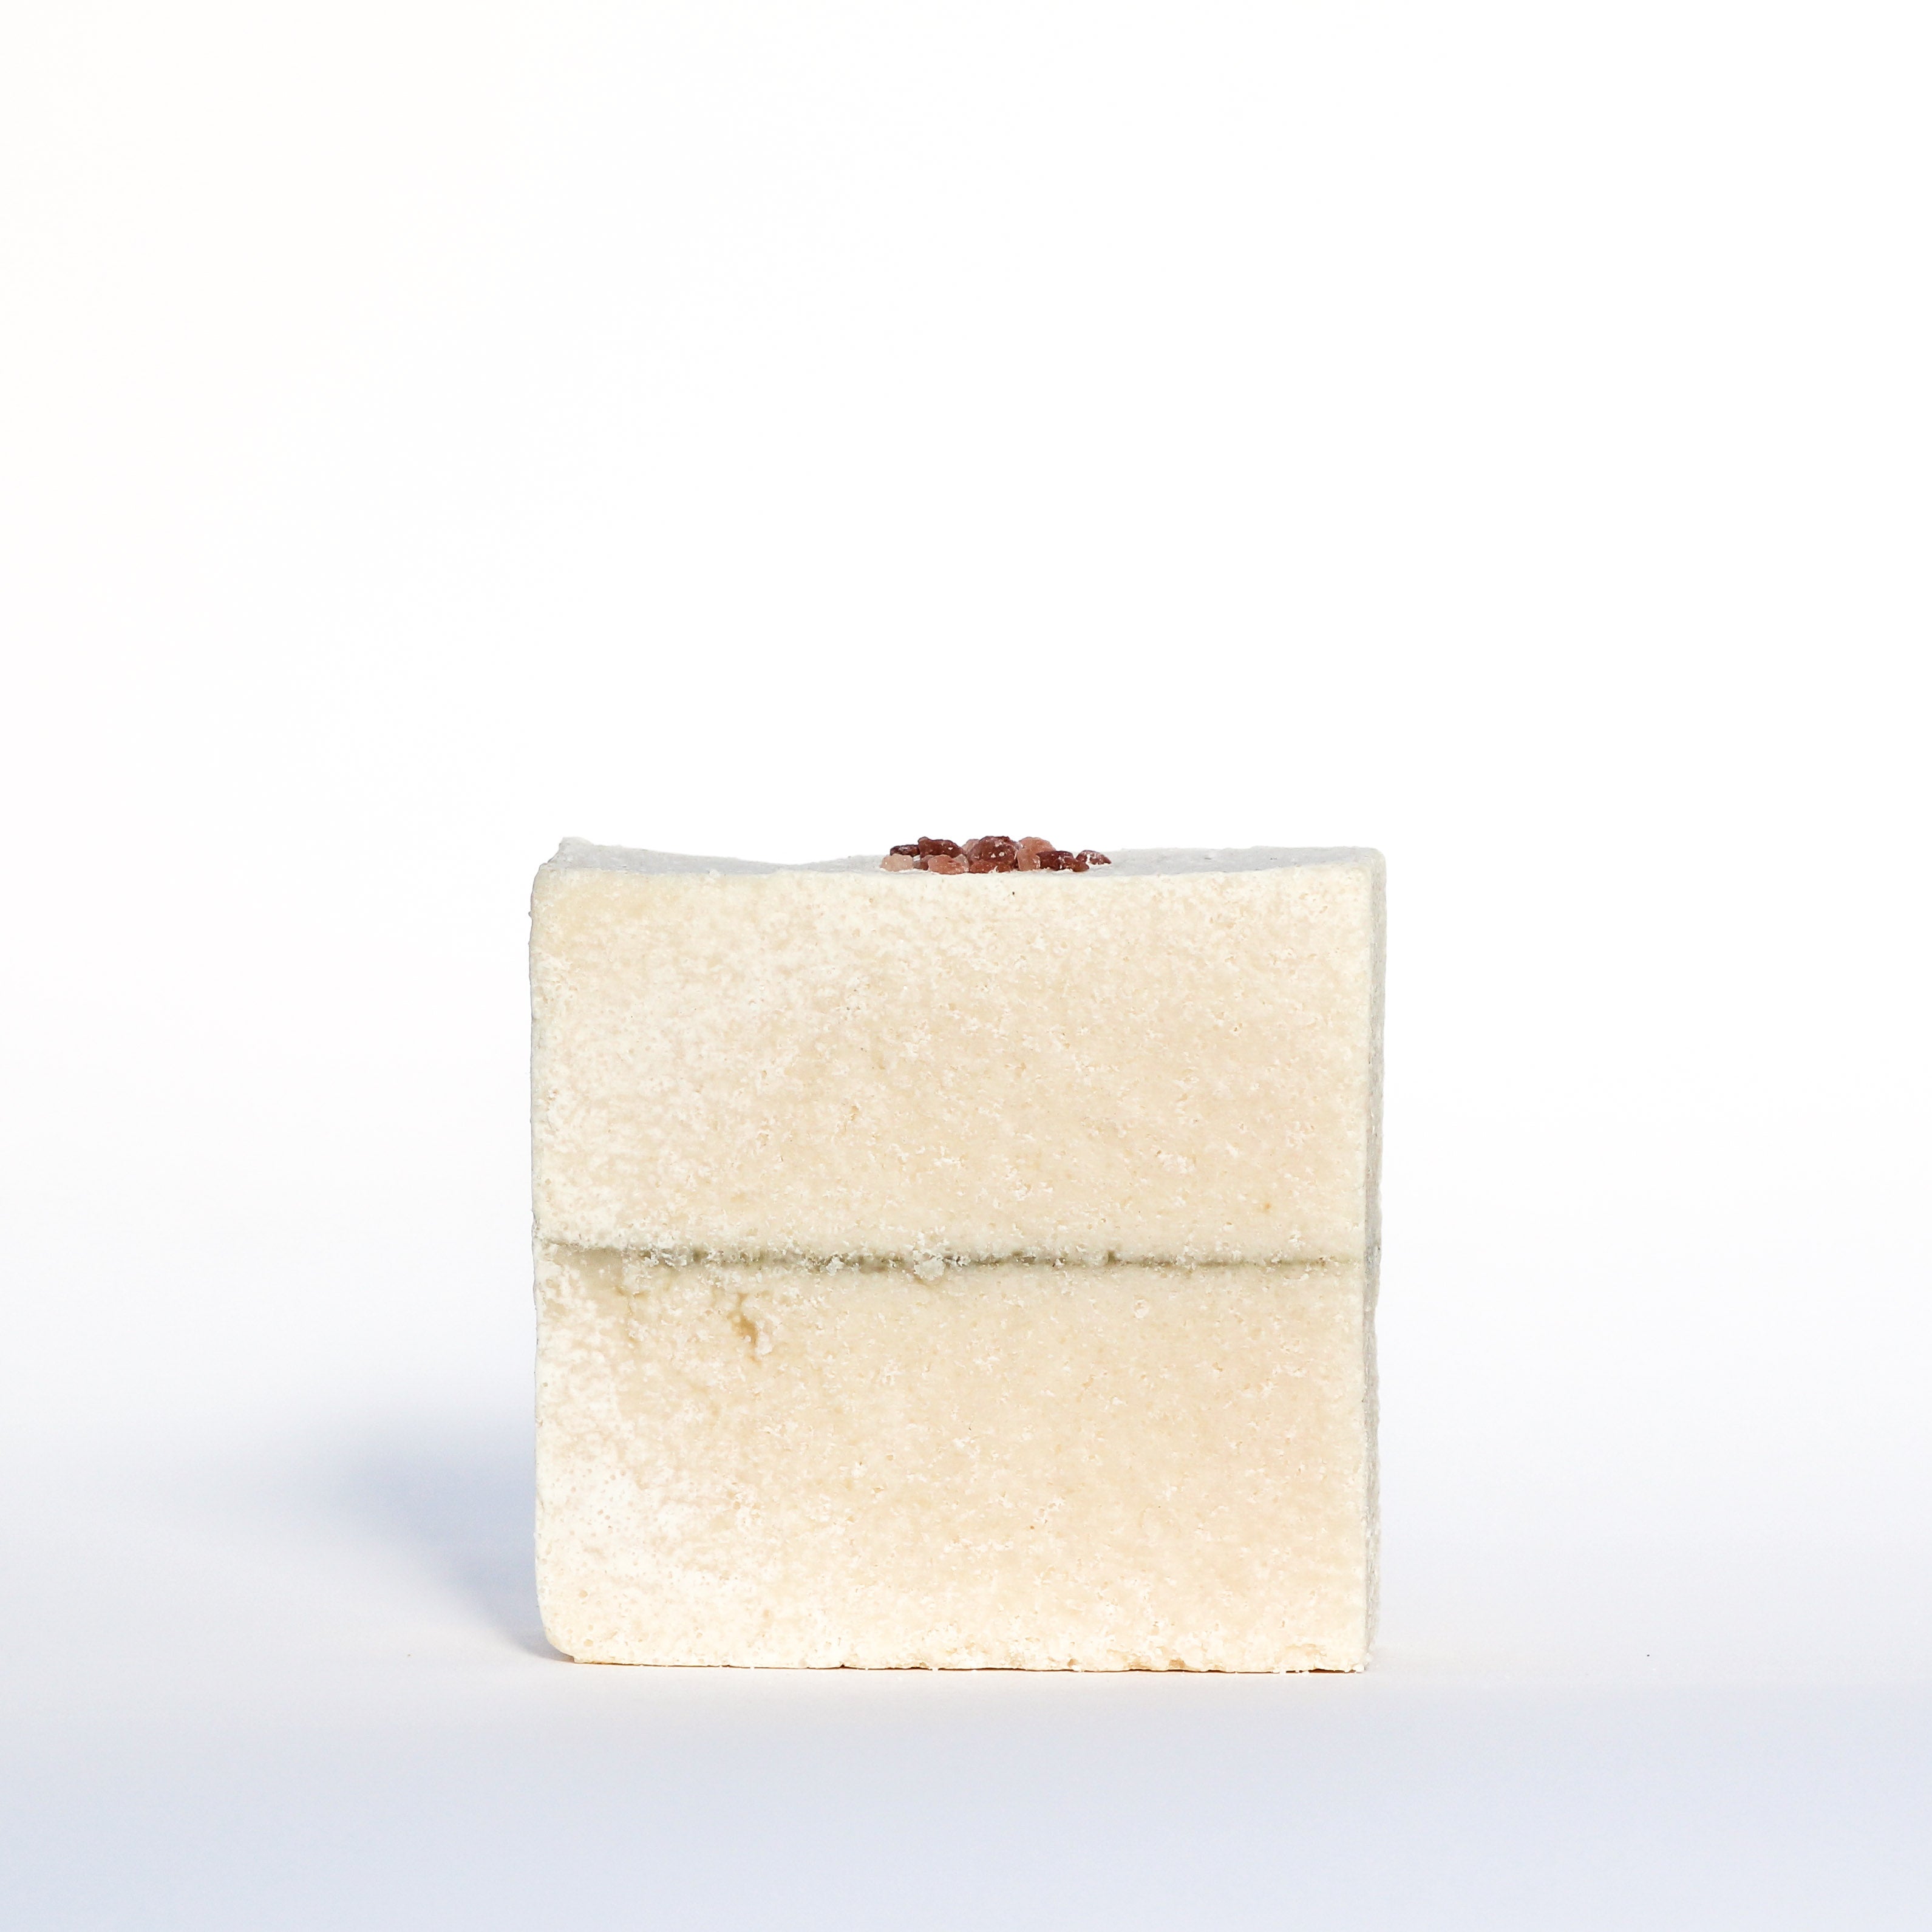 Salt soap with seaweed dividing line with topped Himalayan salt.